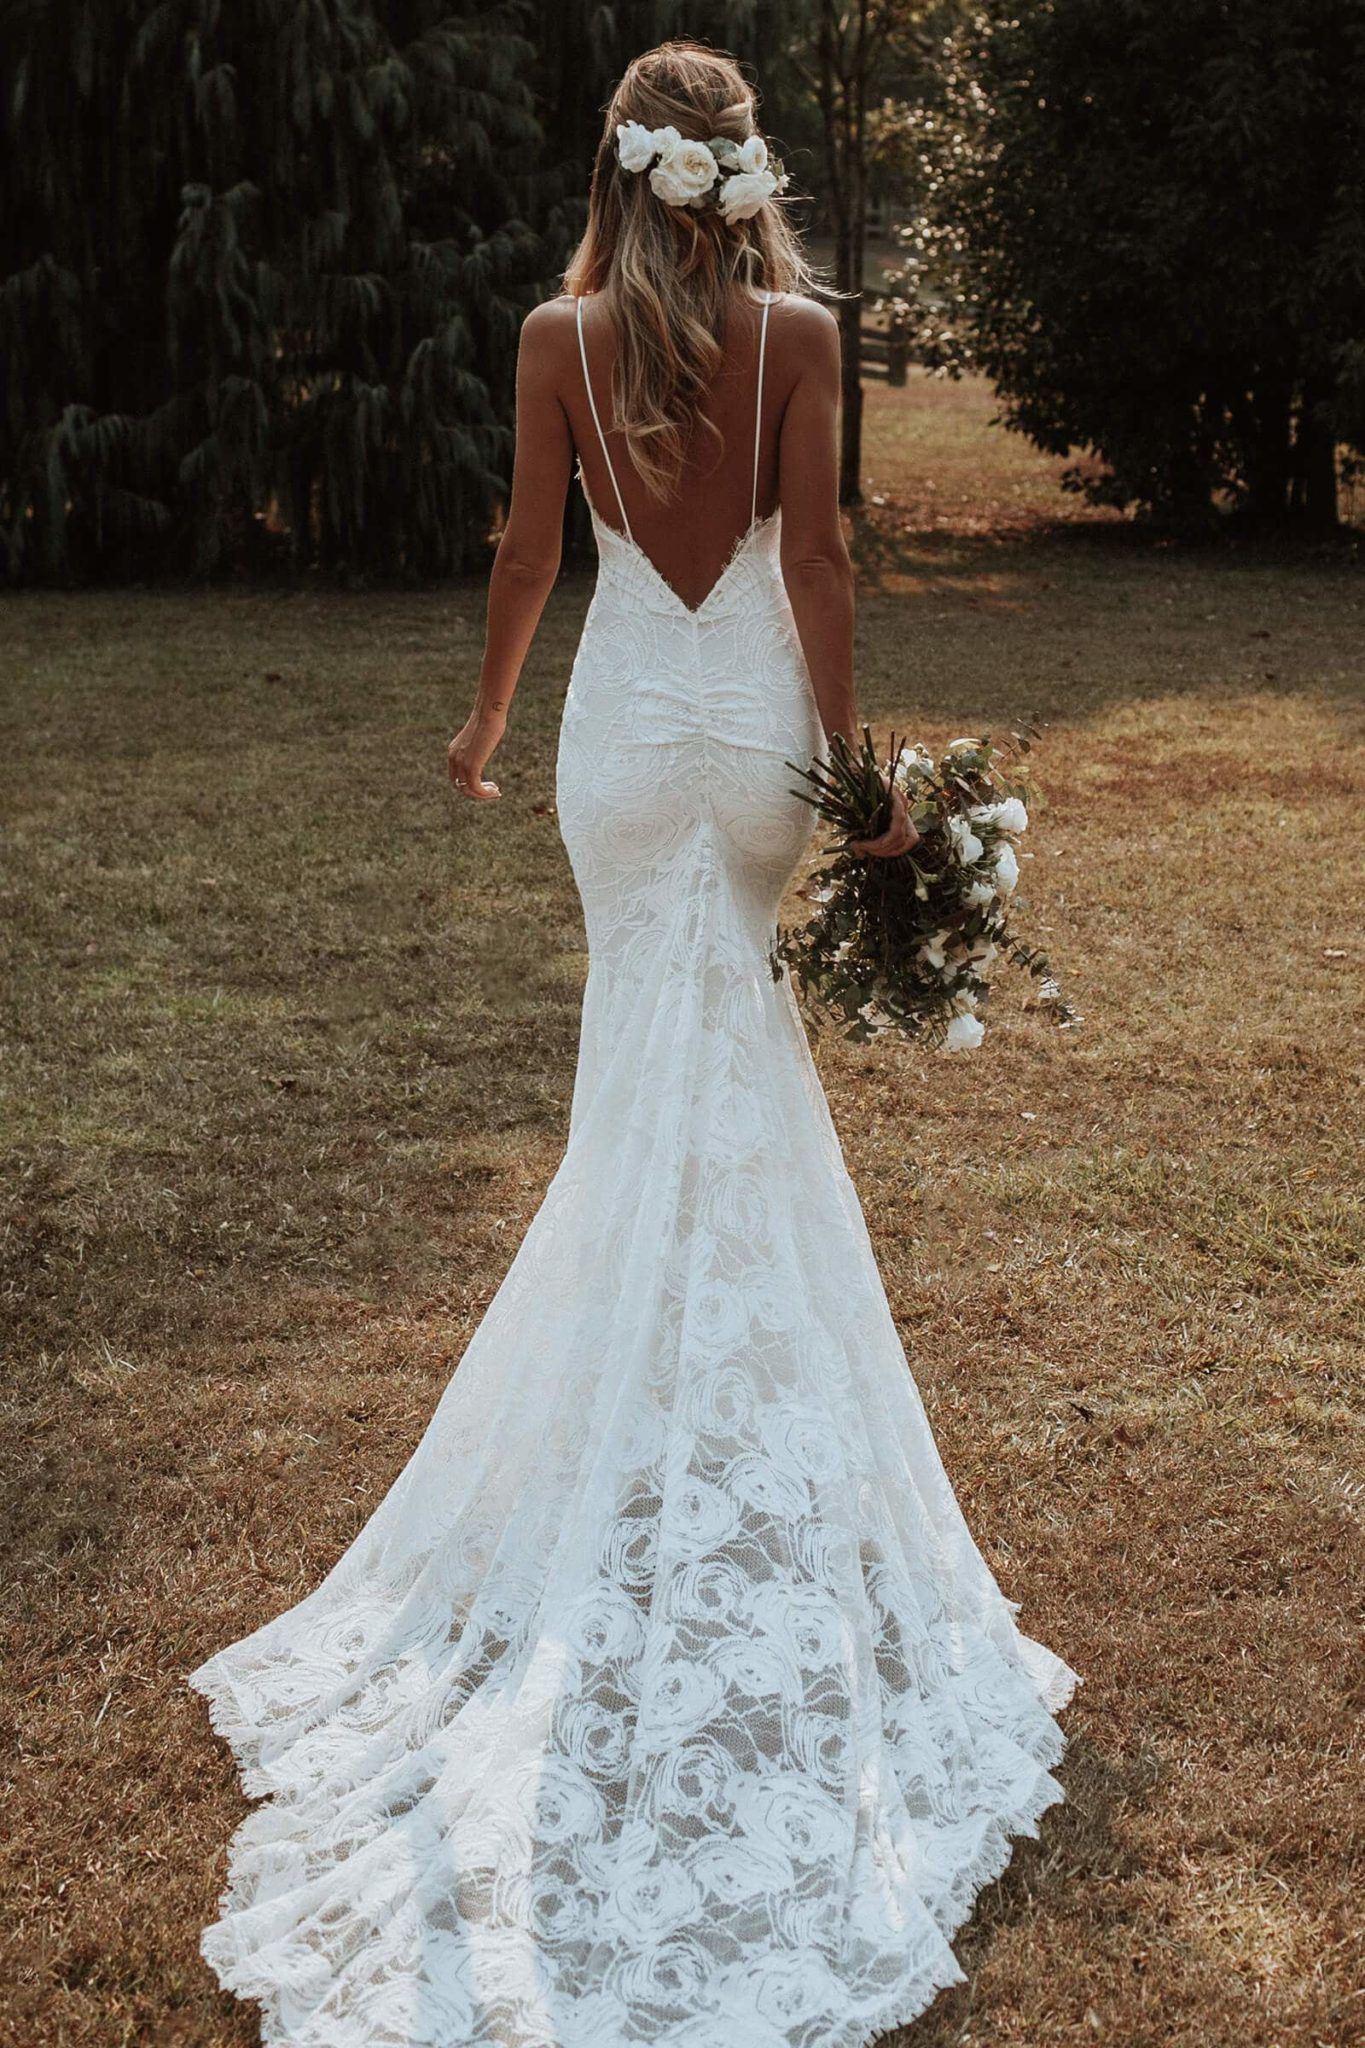 Lace wedding dresses- get a perfect look!